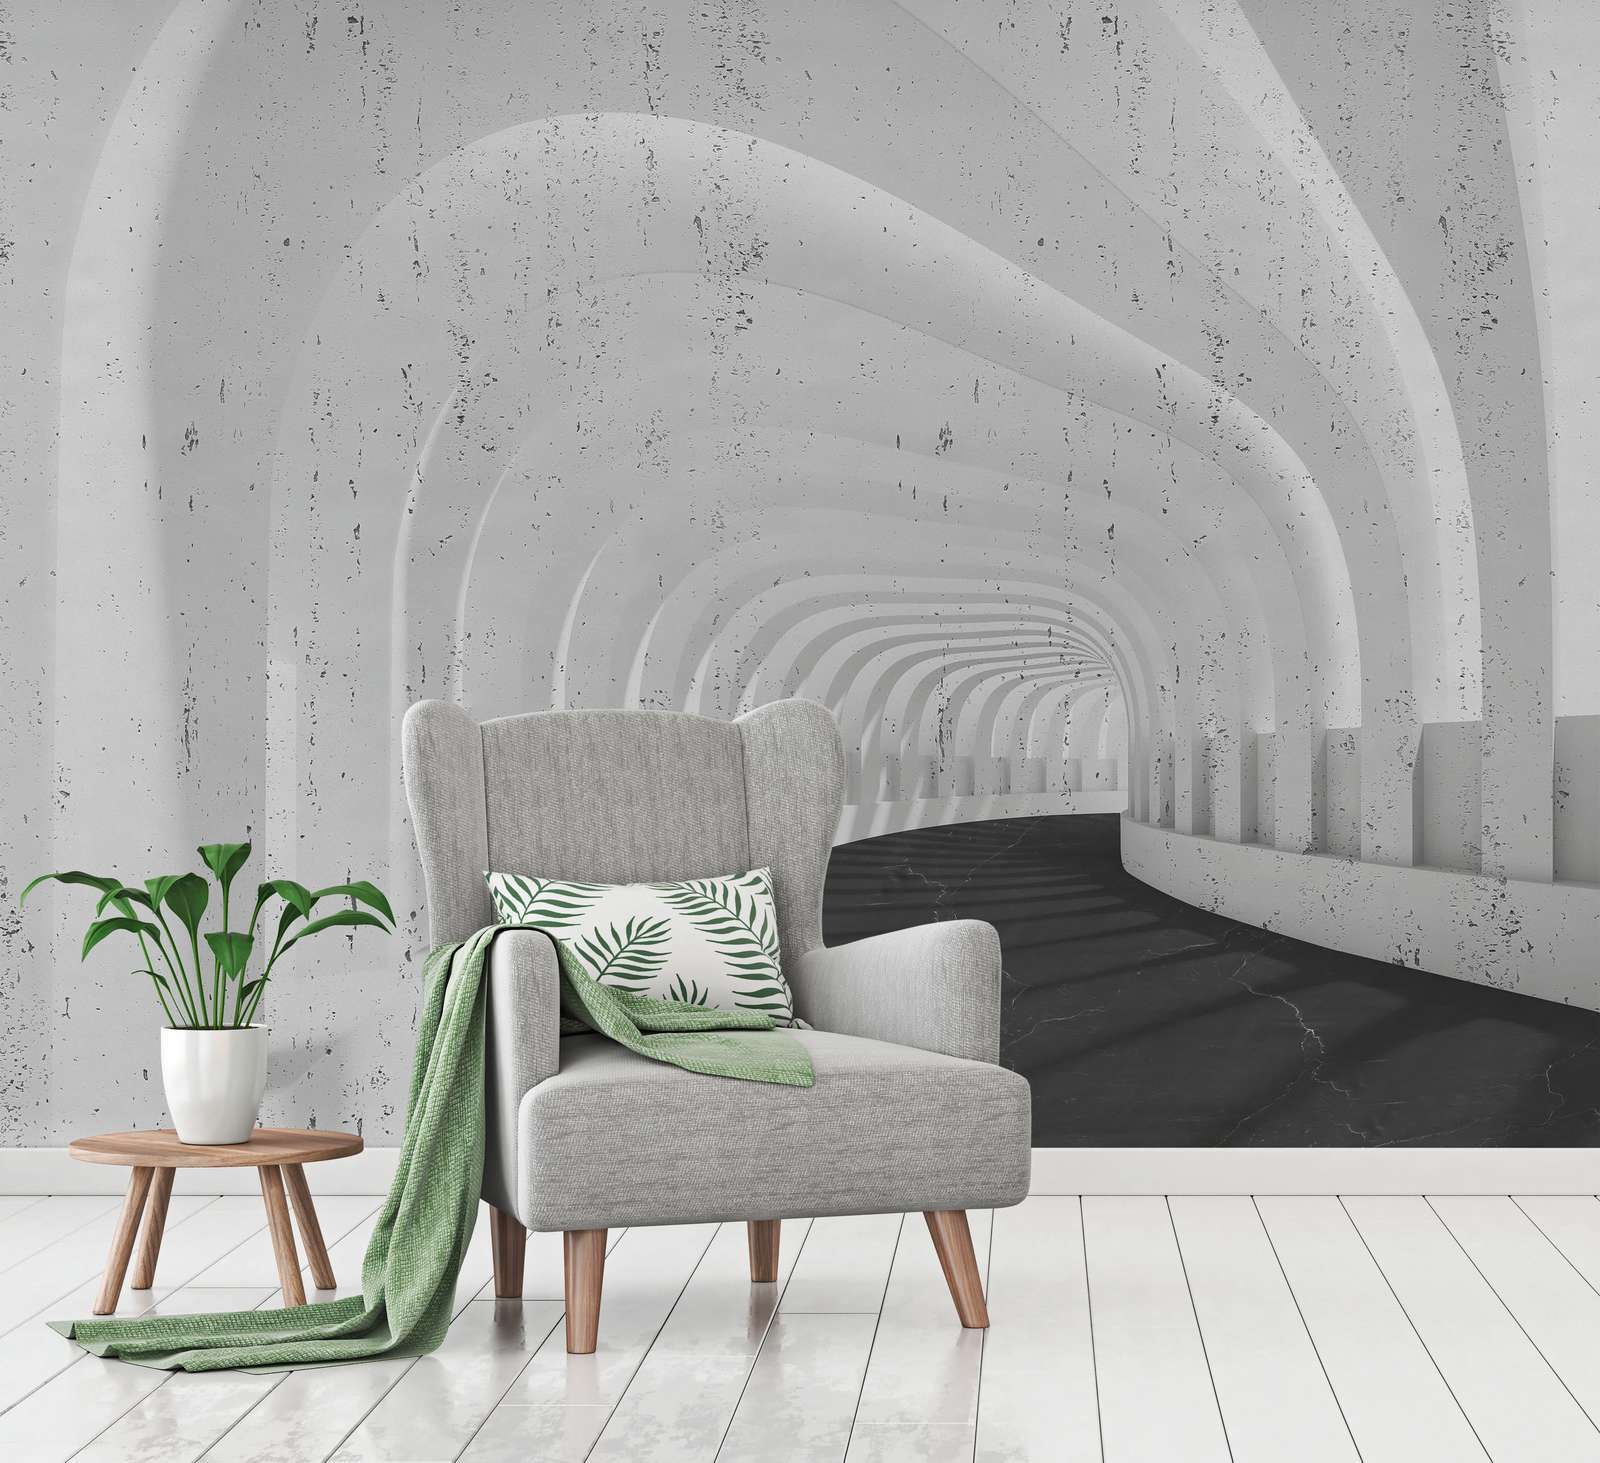 3D Concrete Tunnel Wallpaper with Arches - Grey, Black